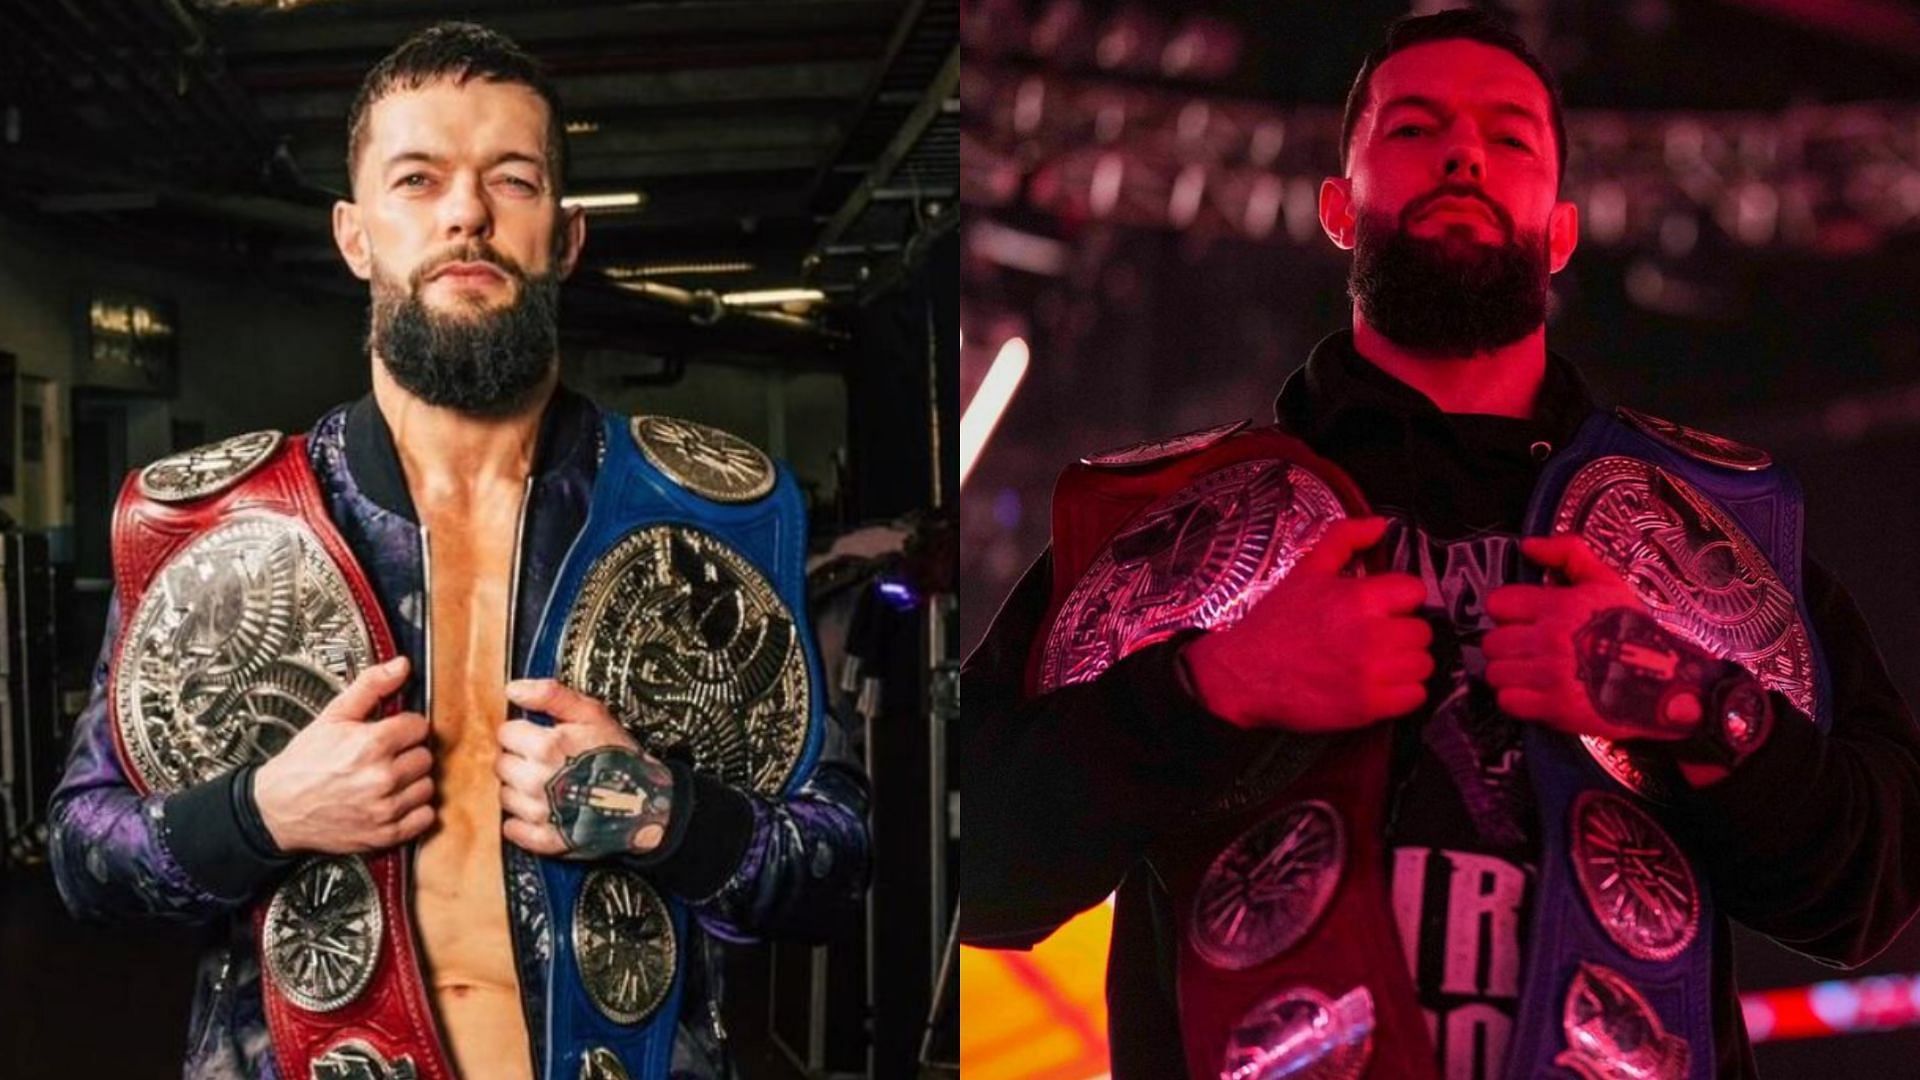 Balor is a former Universal Champion.